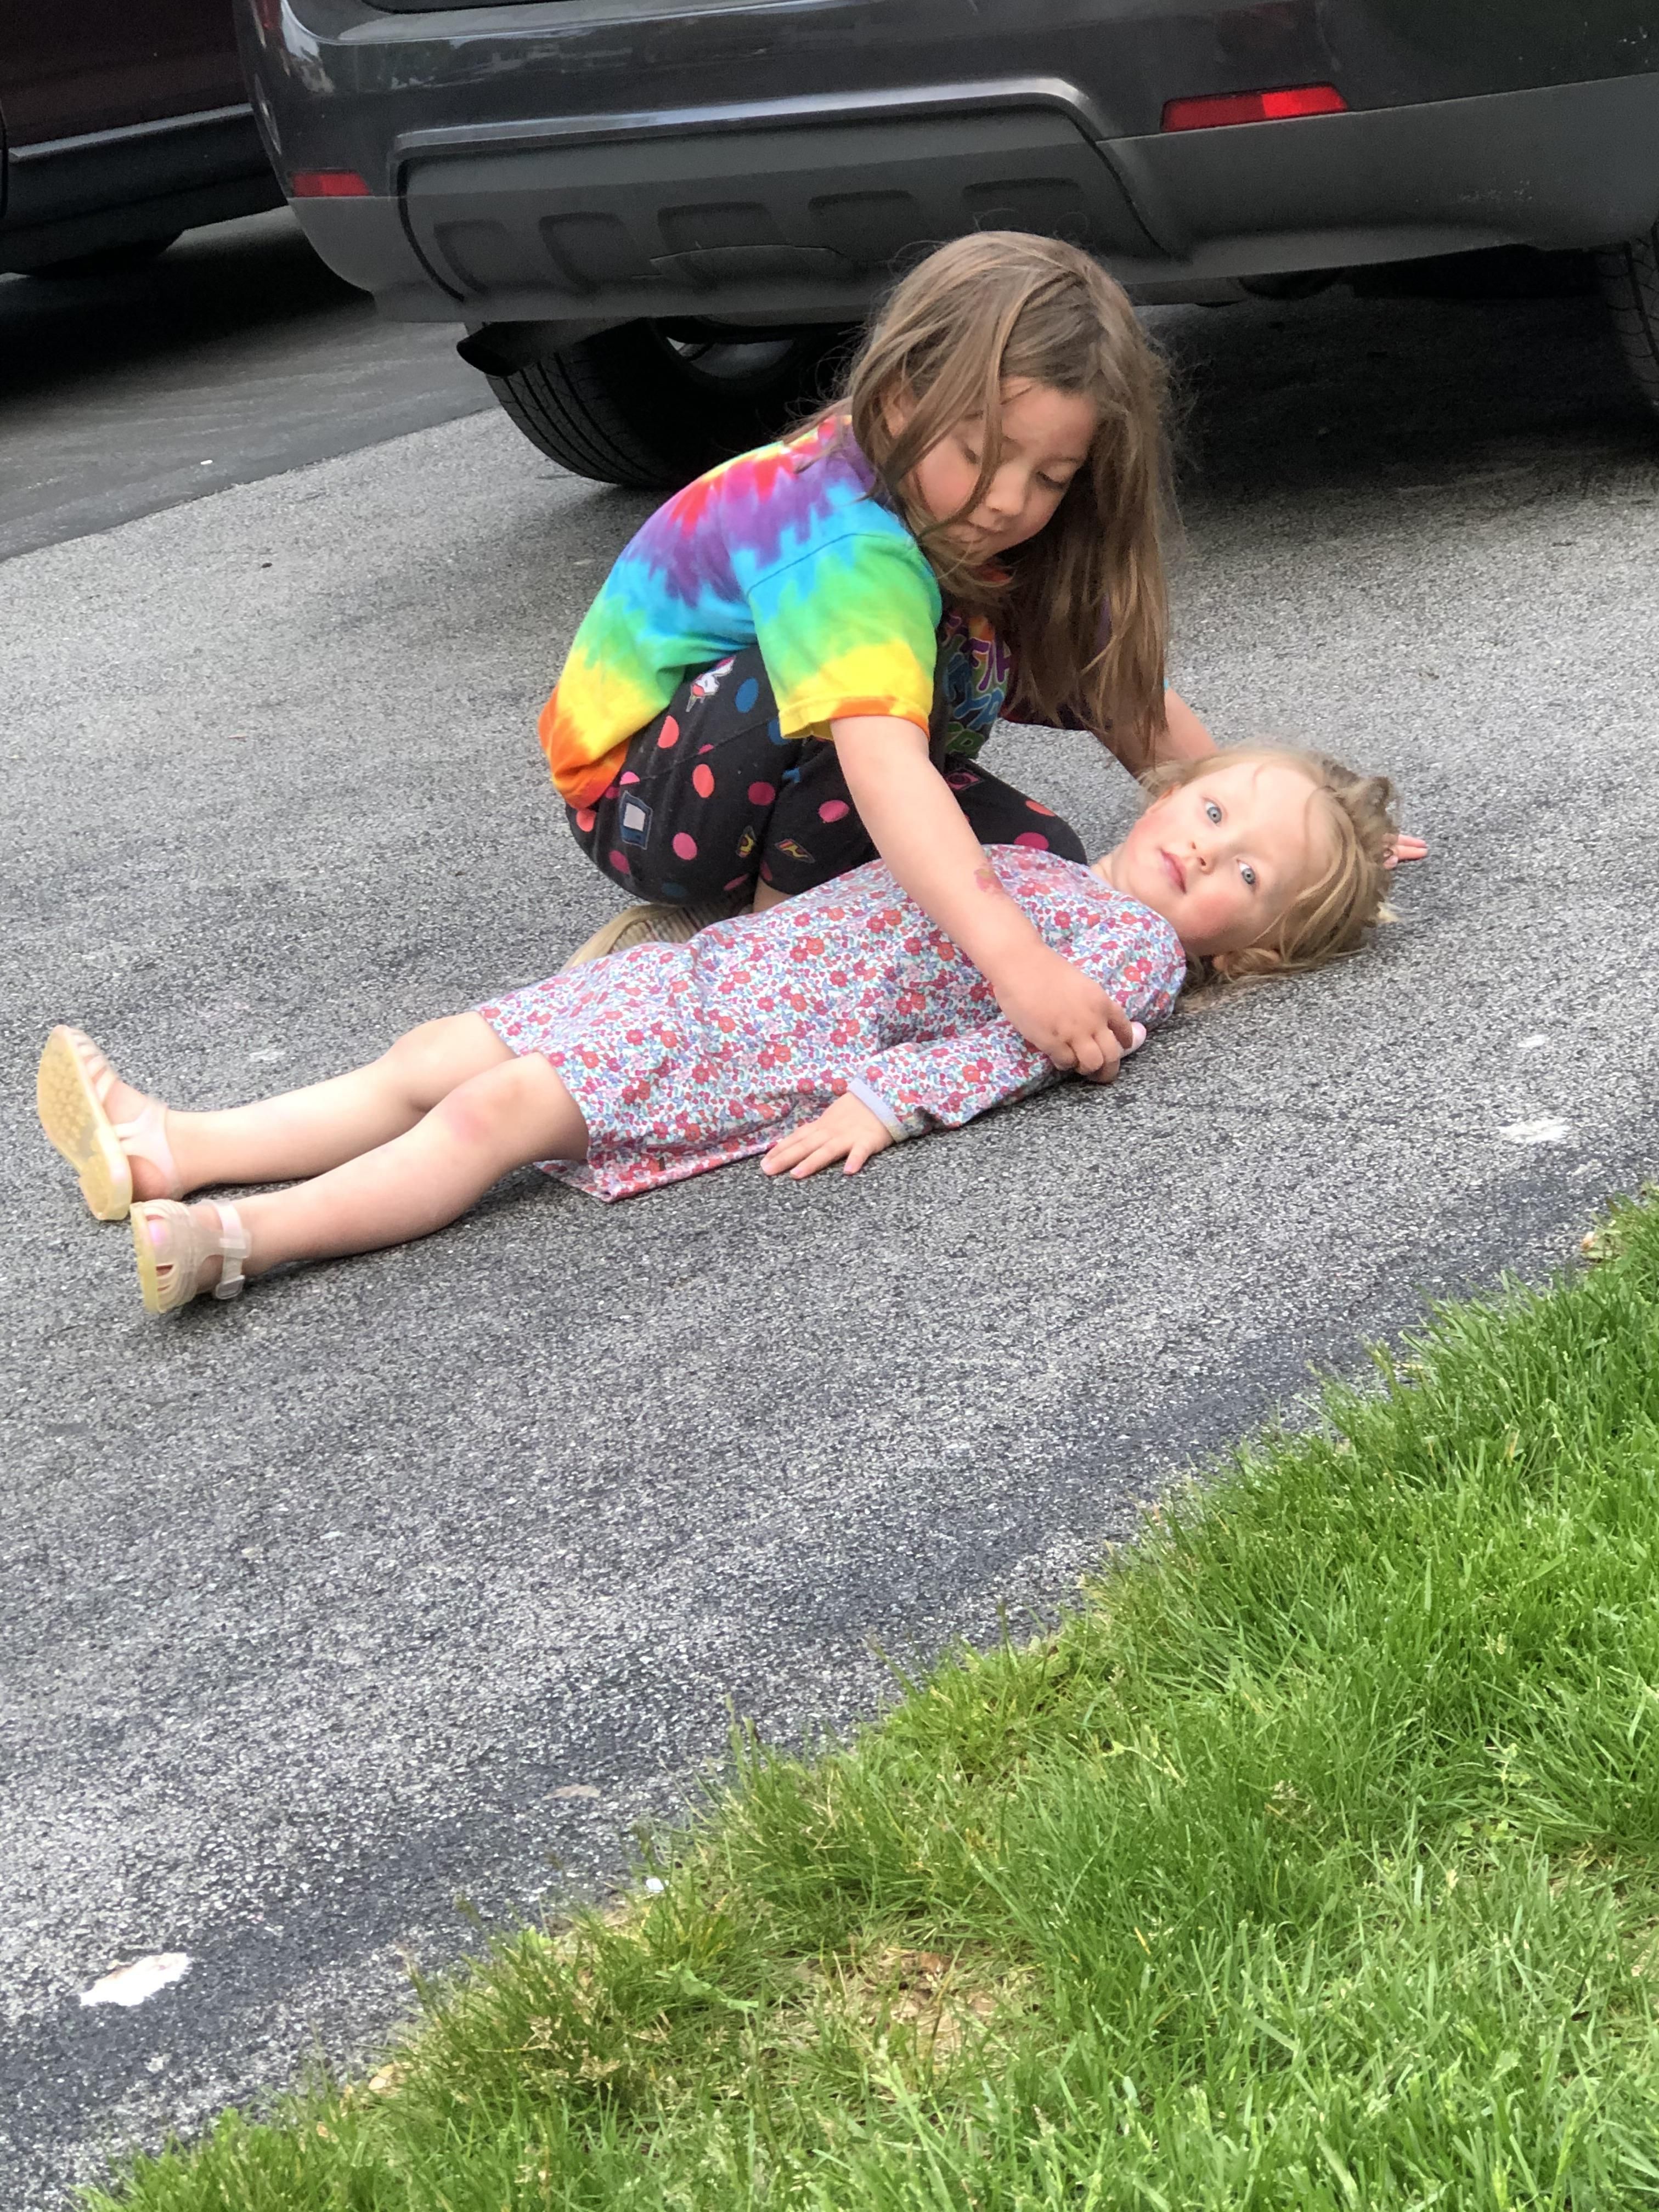 My daughters wanted to play with chalk outside. I came out to them setting up a fake crime scene.